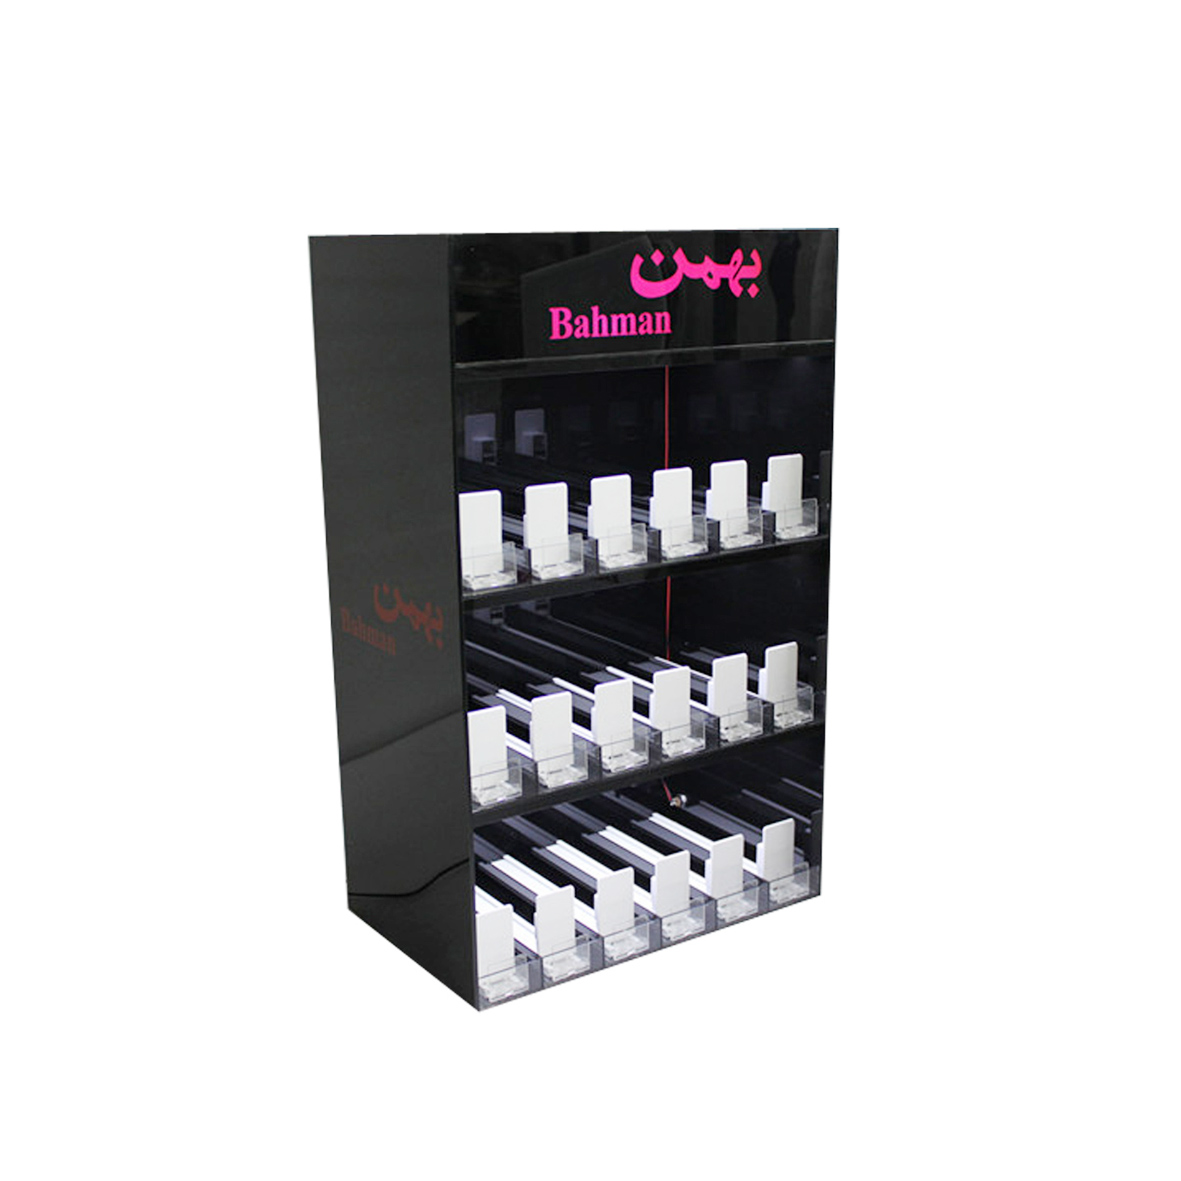 Glowing cigarette display stand with brand logo